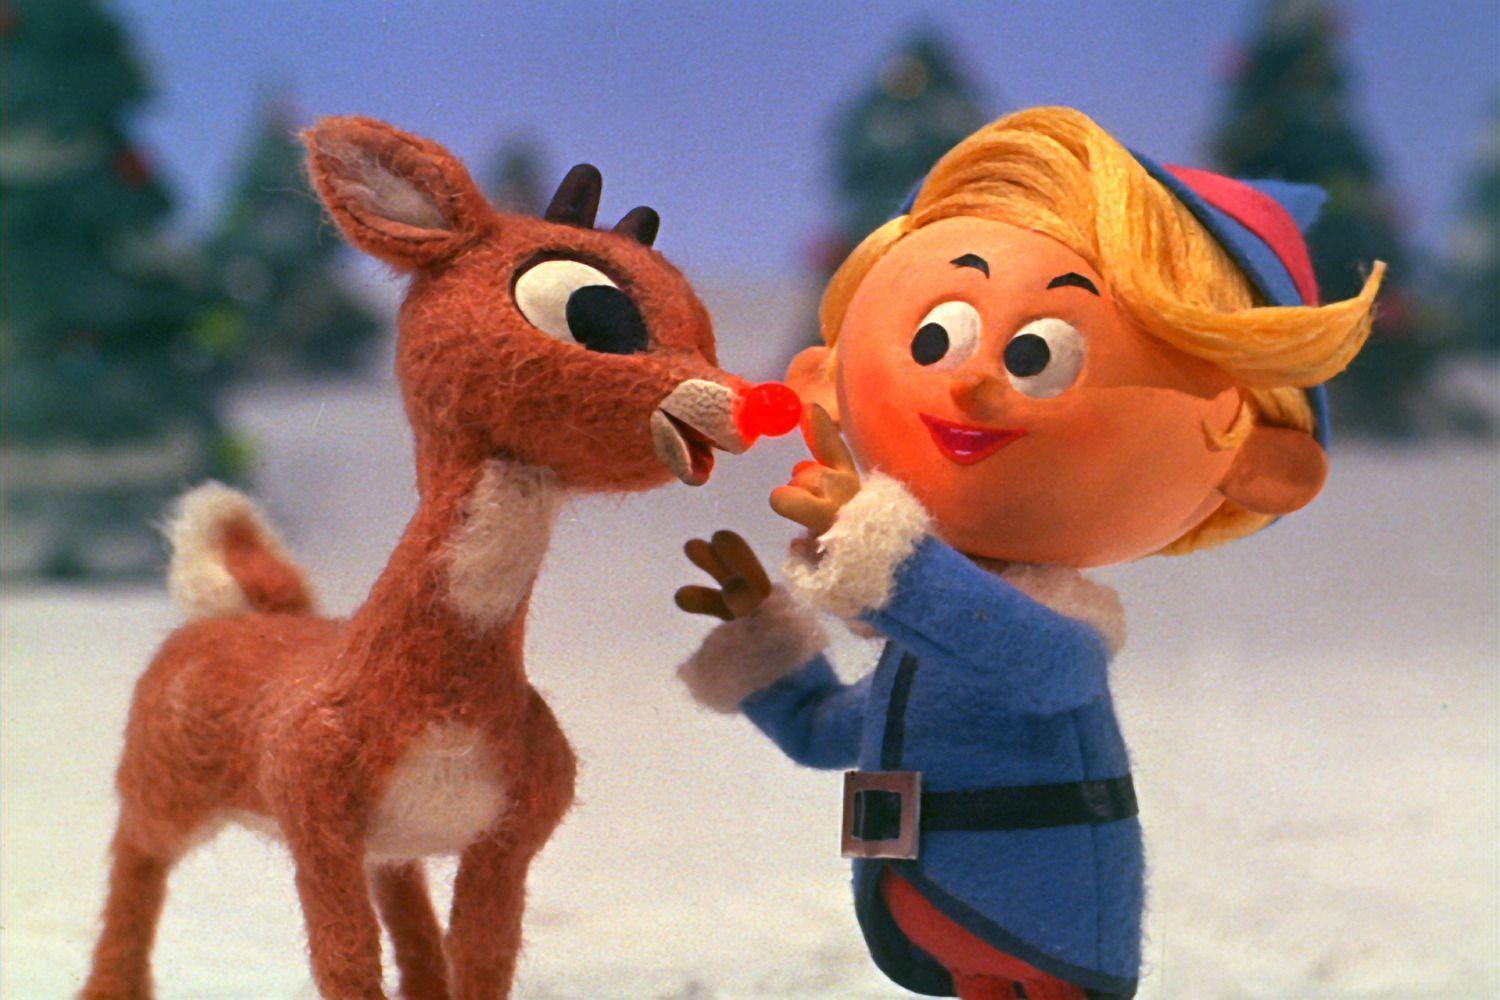 rudolph wallpaper 3. Image And Wallpaper free